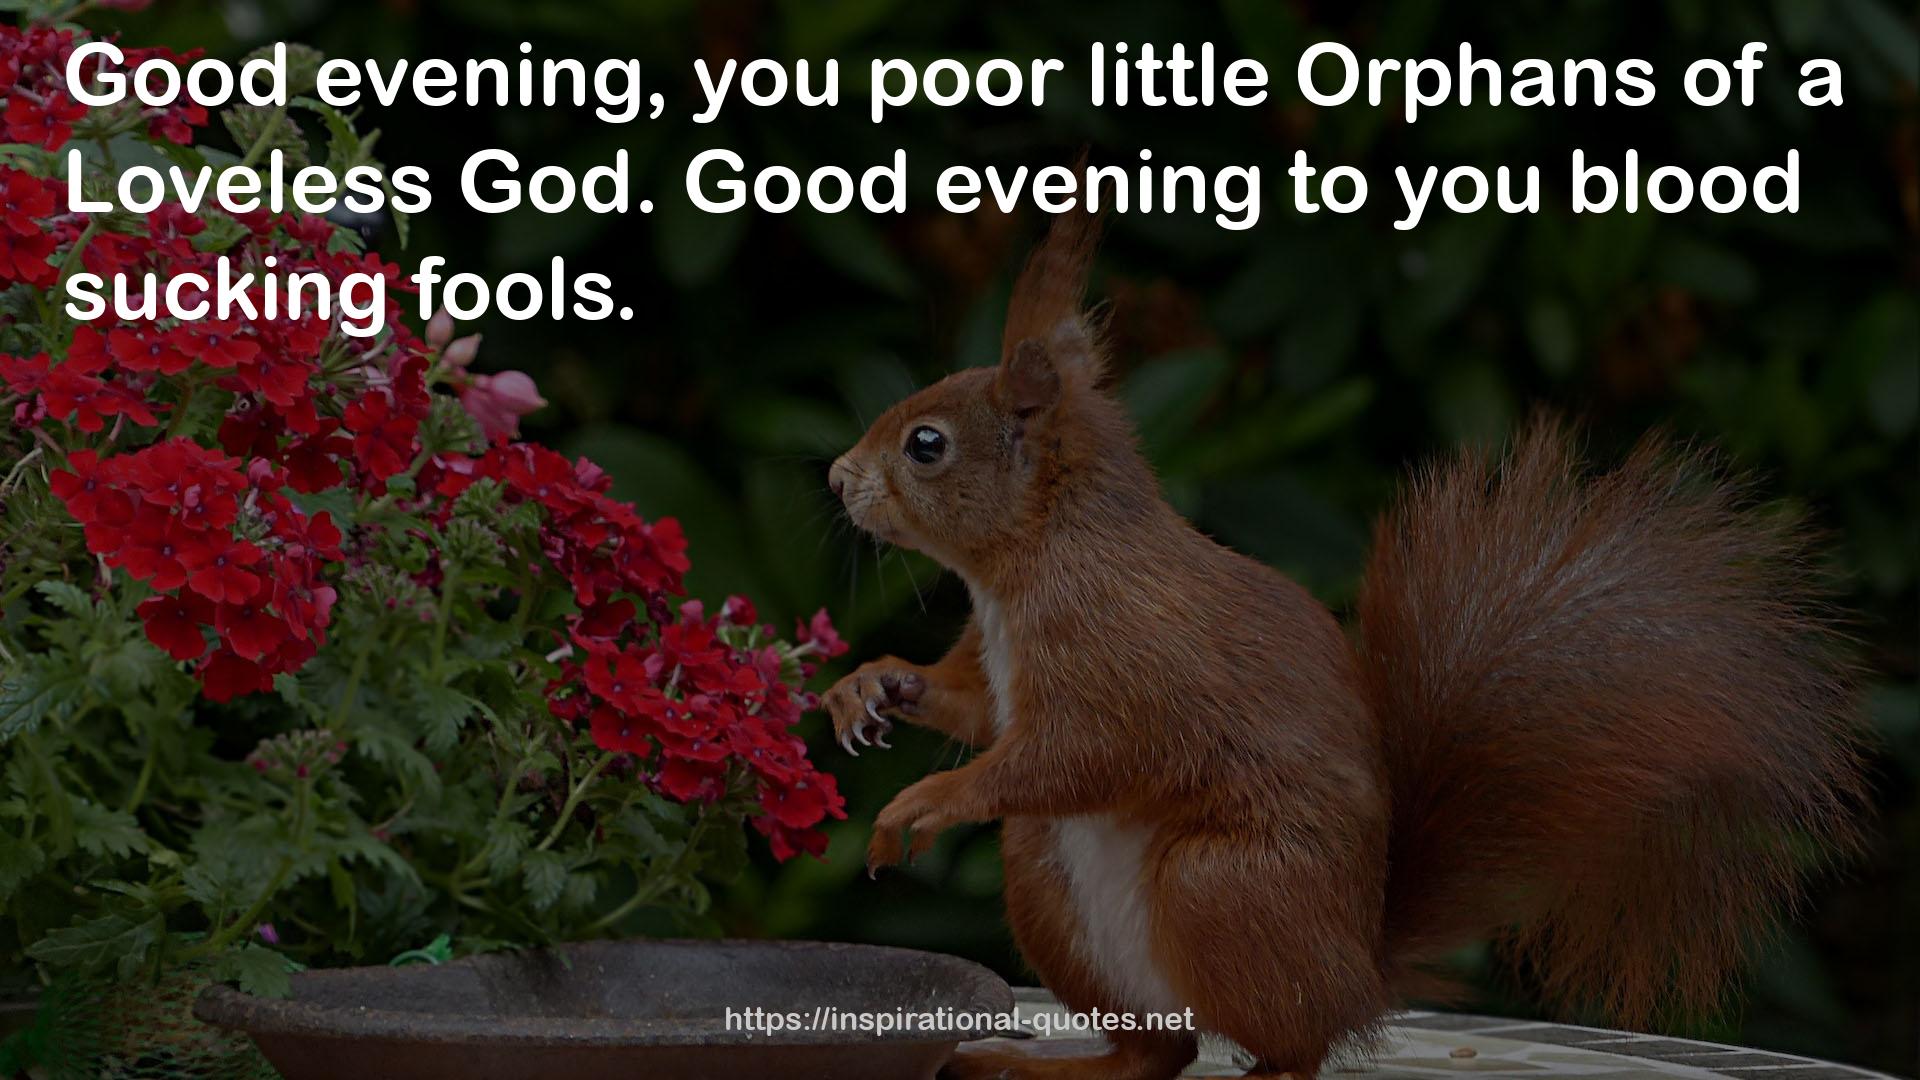 poor little Orphans  QUOTES